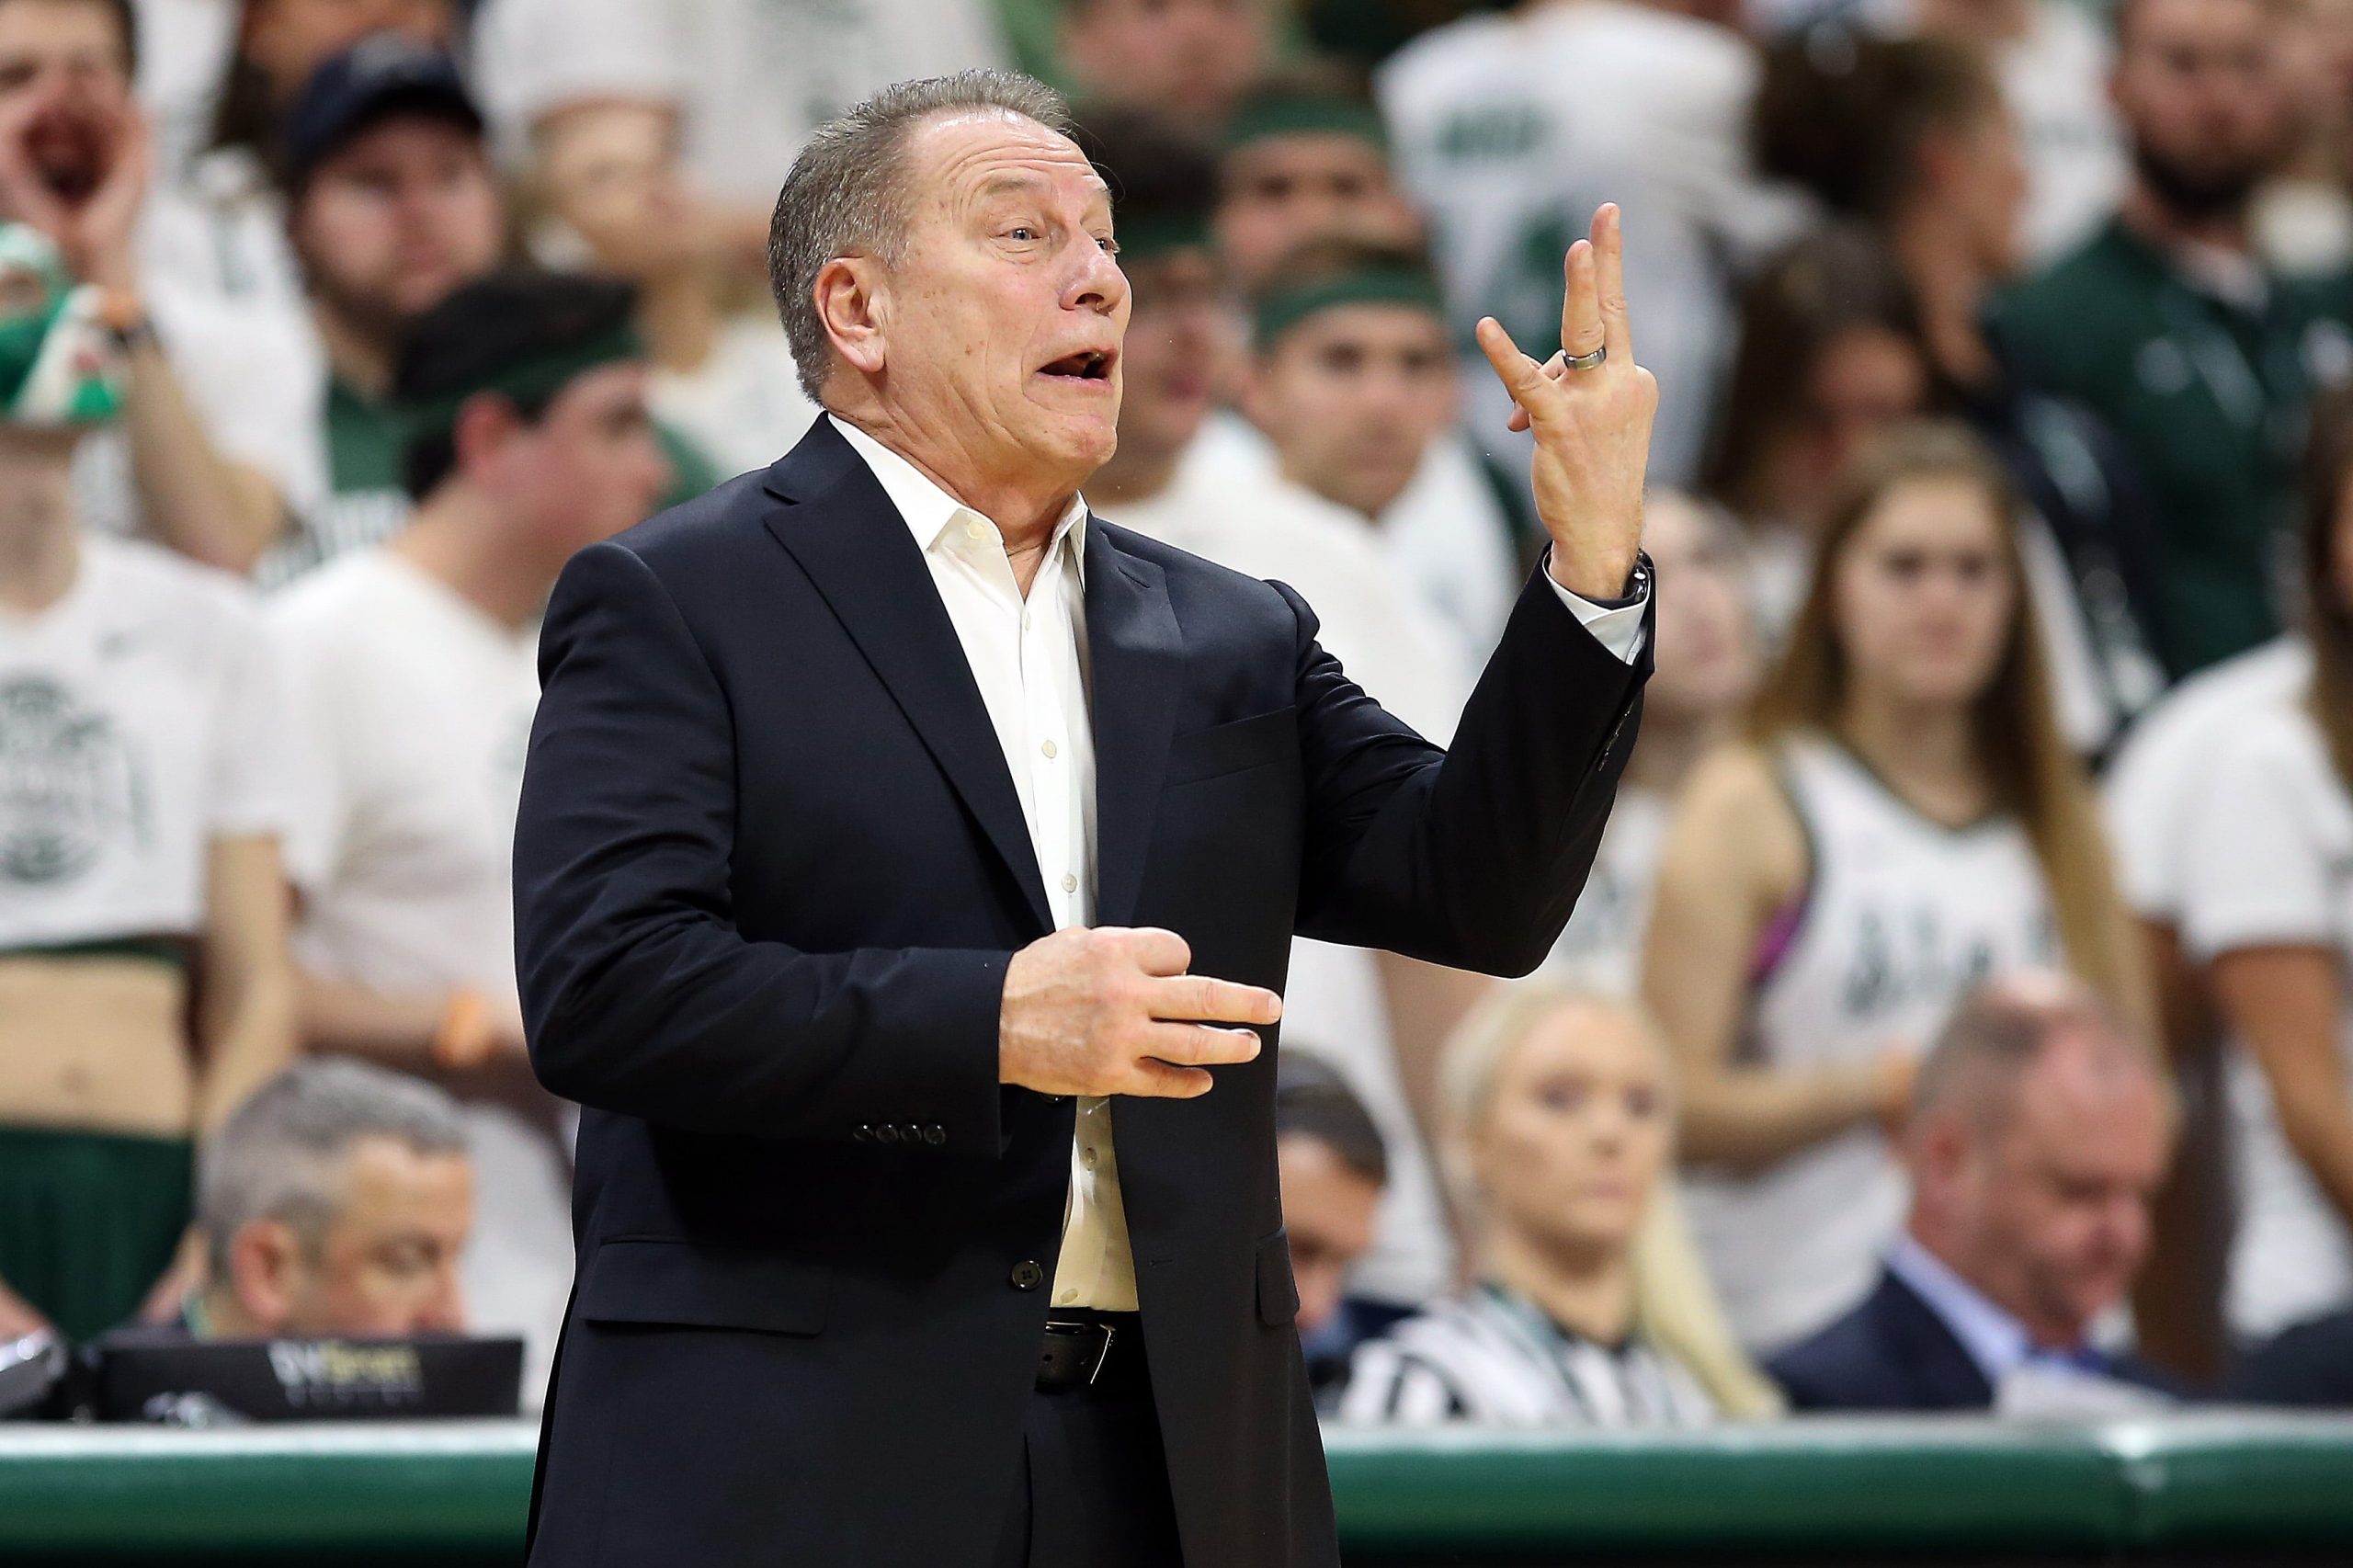 Michigan State basketball coach Tom Izzo gestures during game against Ohio State